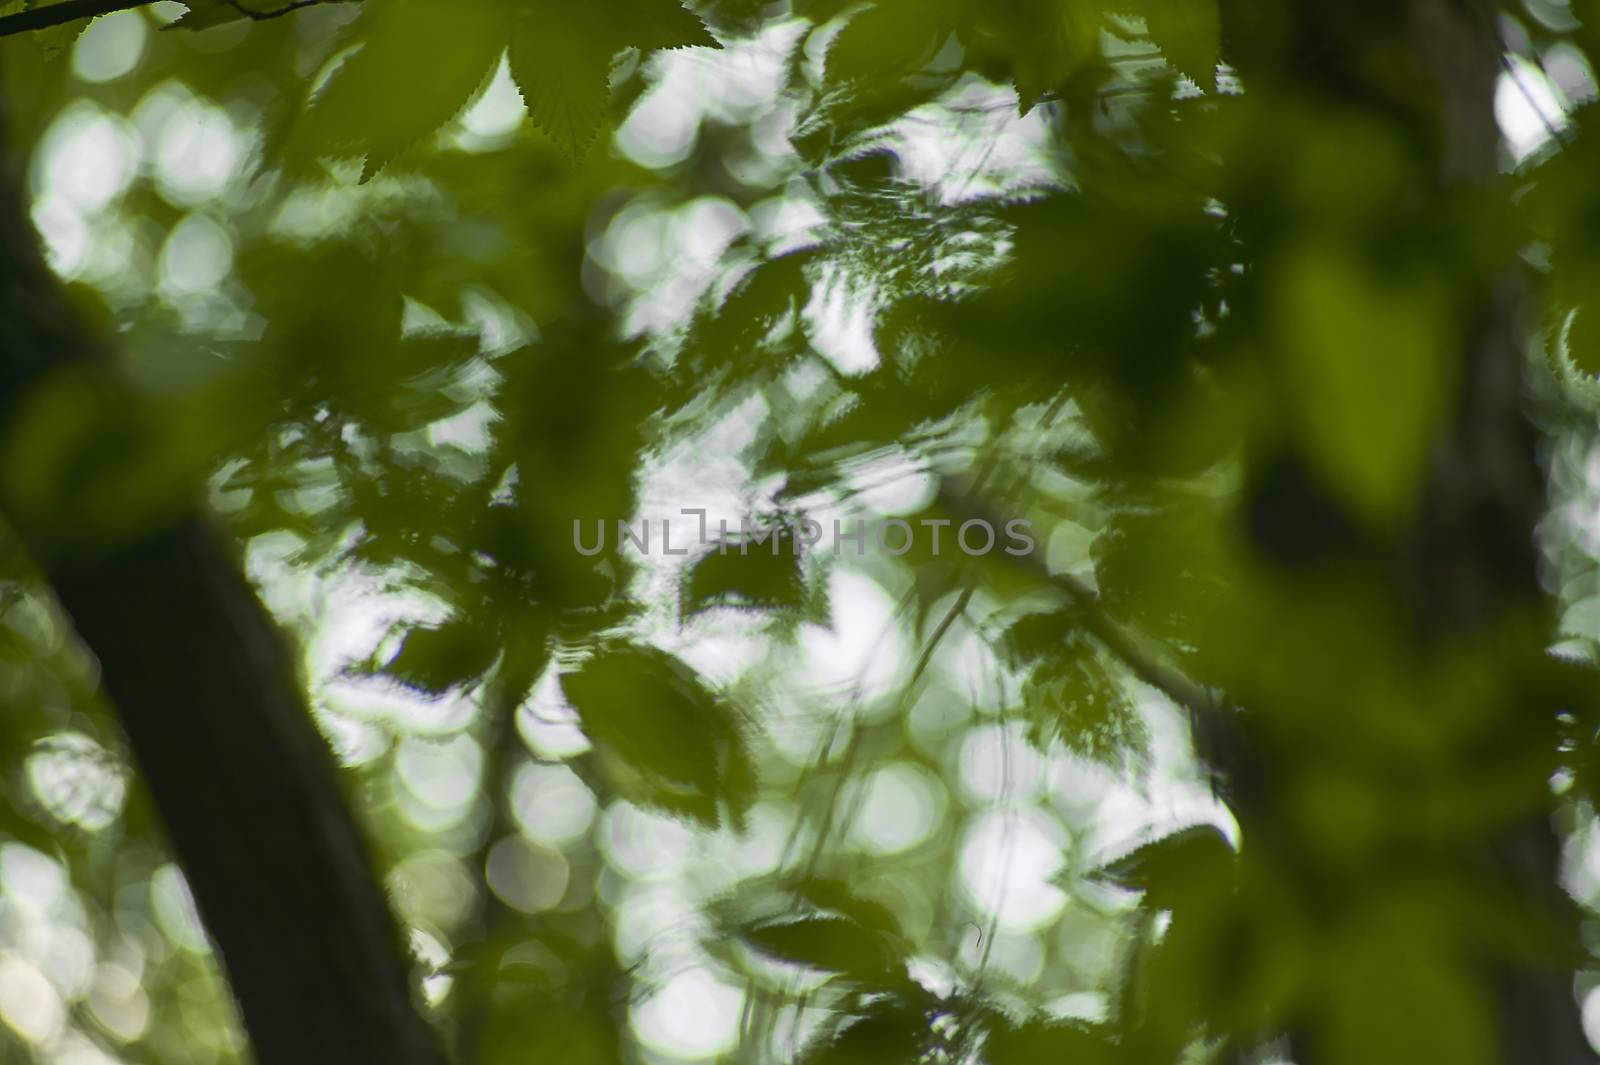 A multitude of leafs of a tree shining from below and blurred: a view of a drunken person